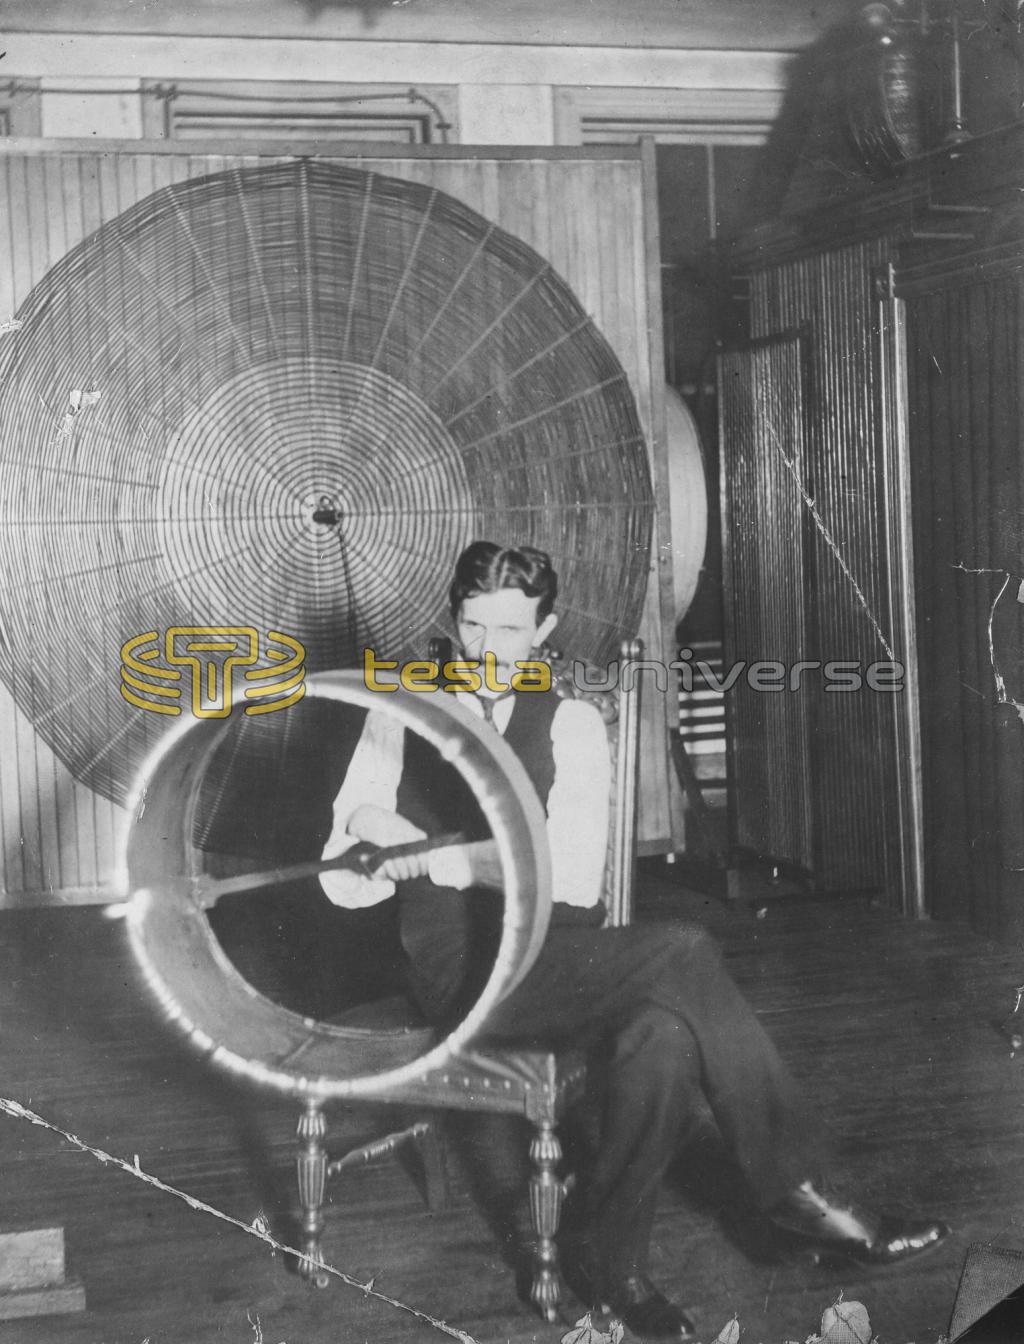 Tesla experimenting with currents of high potential and high frequency in his Houston St. lab